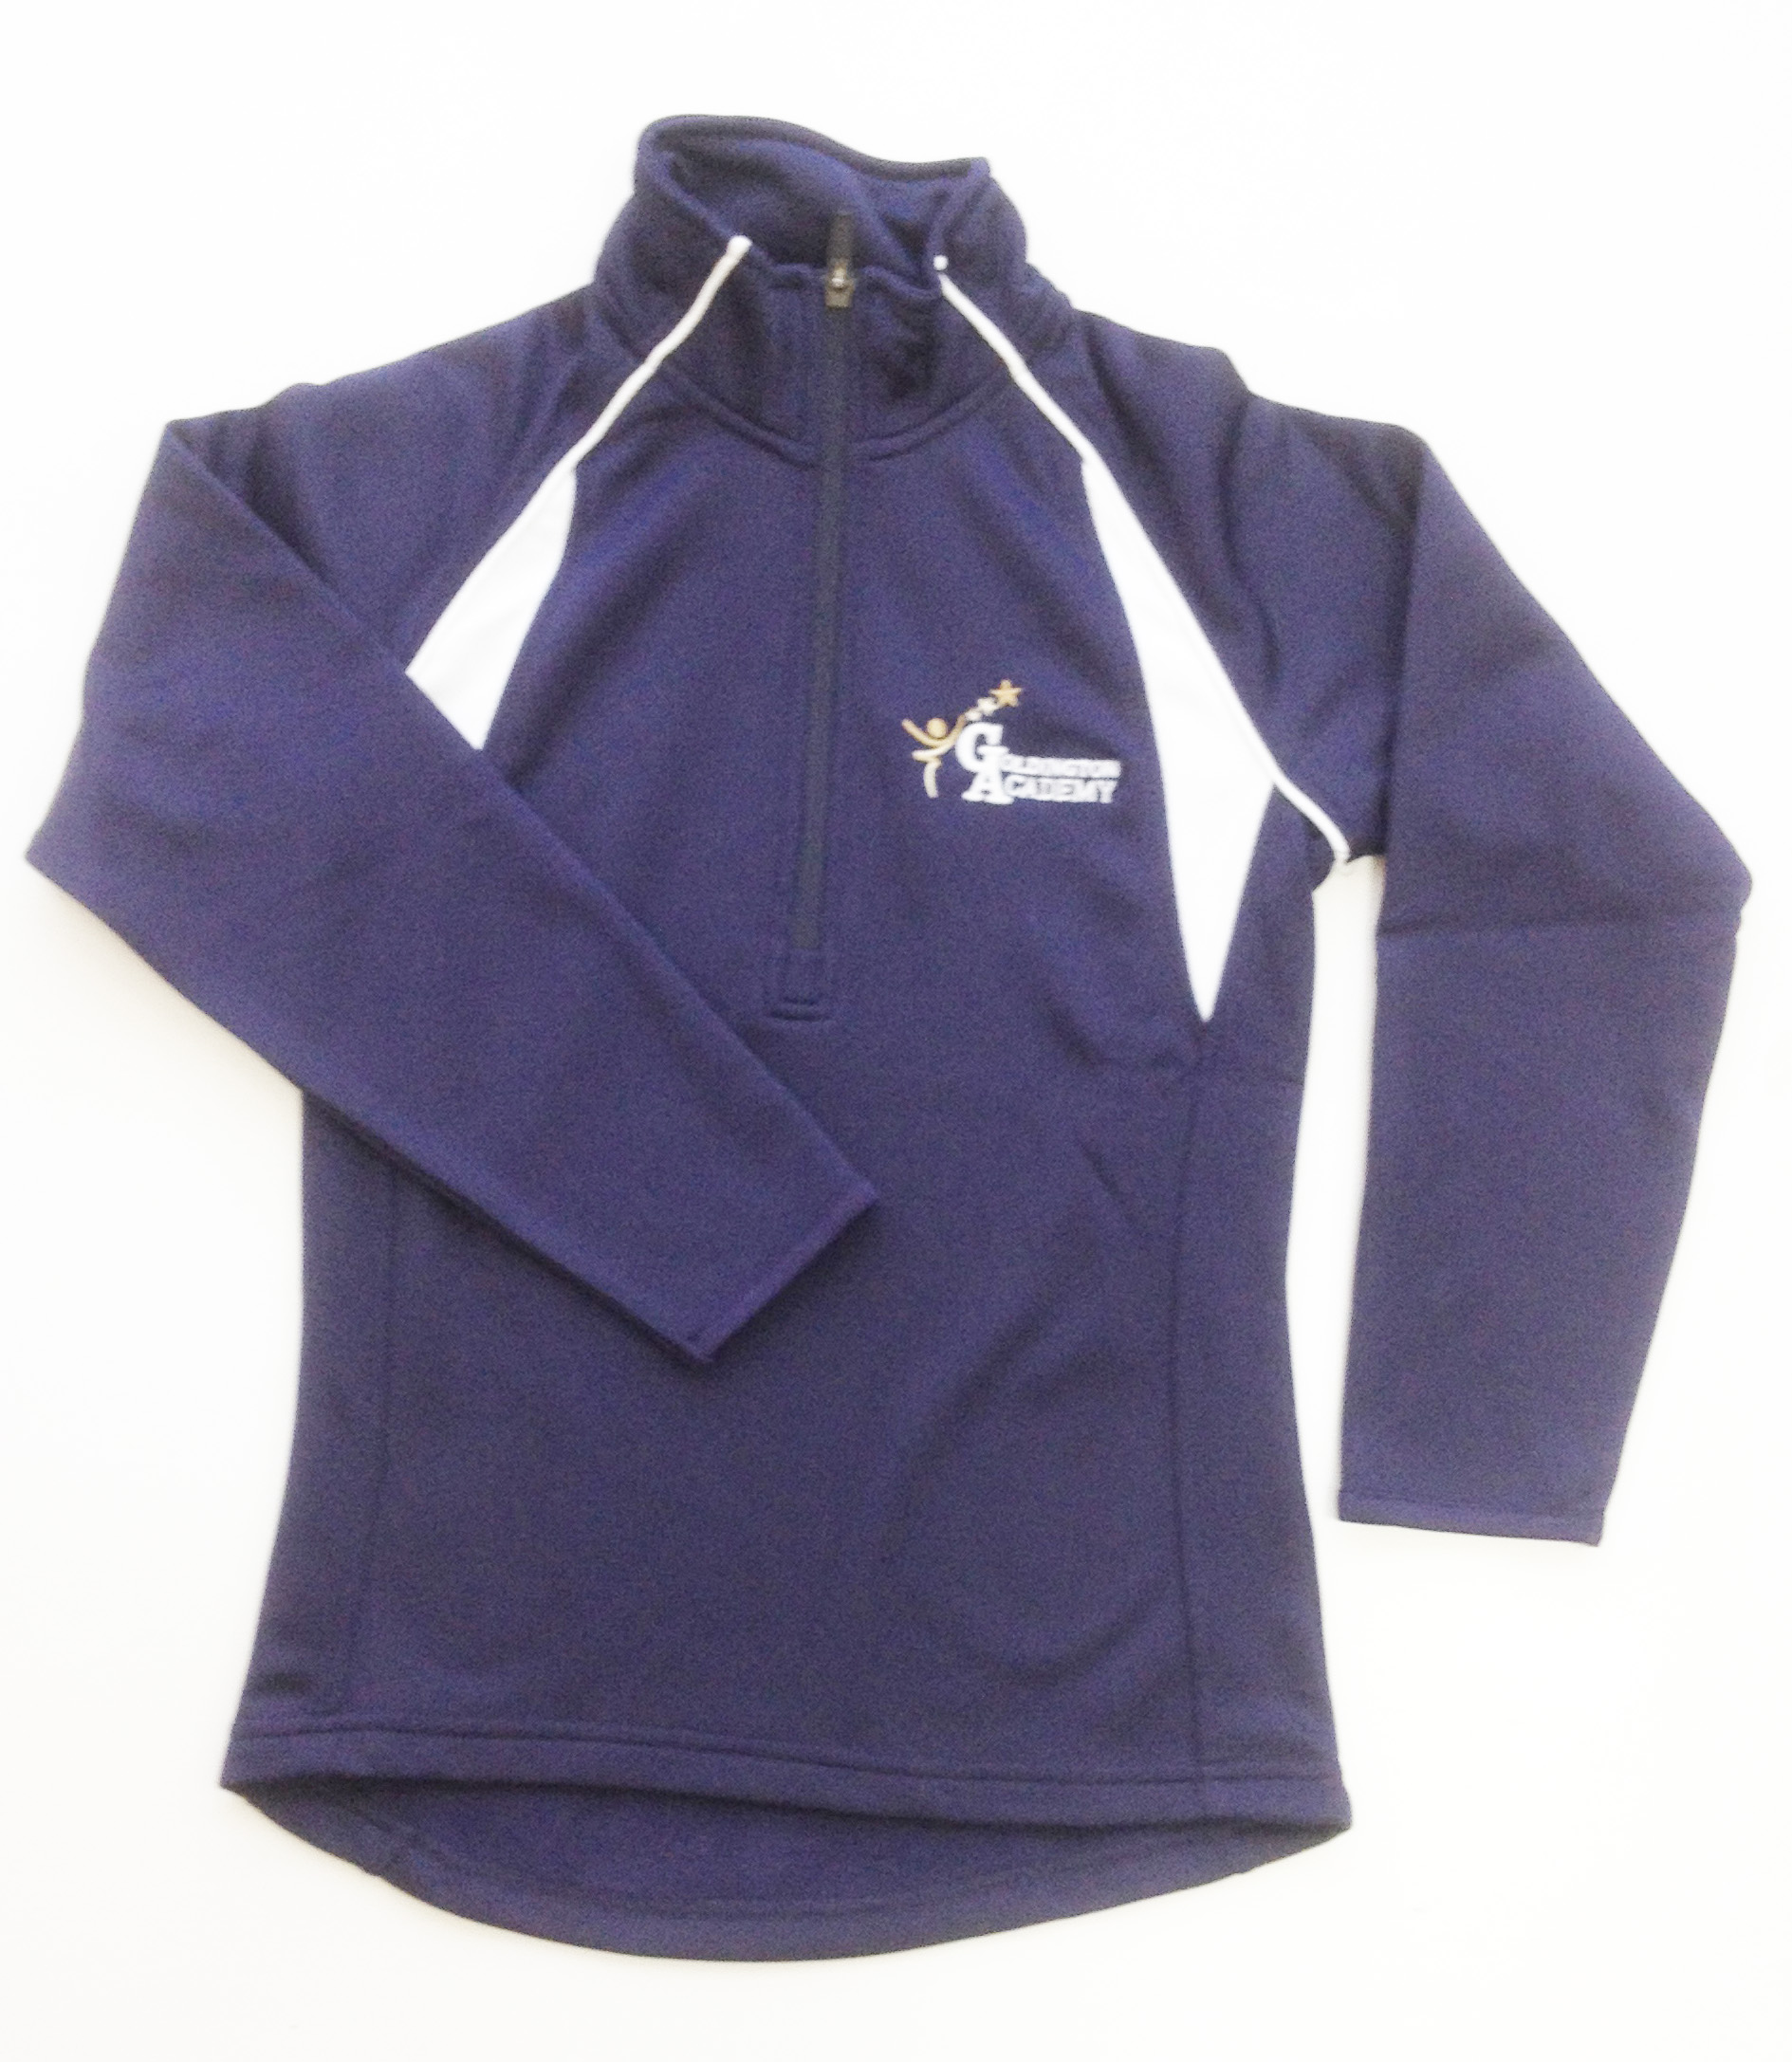 Goldington Academy Girls Long Sleeved Sports Top (Navy/White) REDUCED